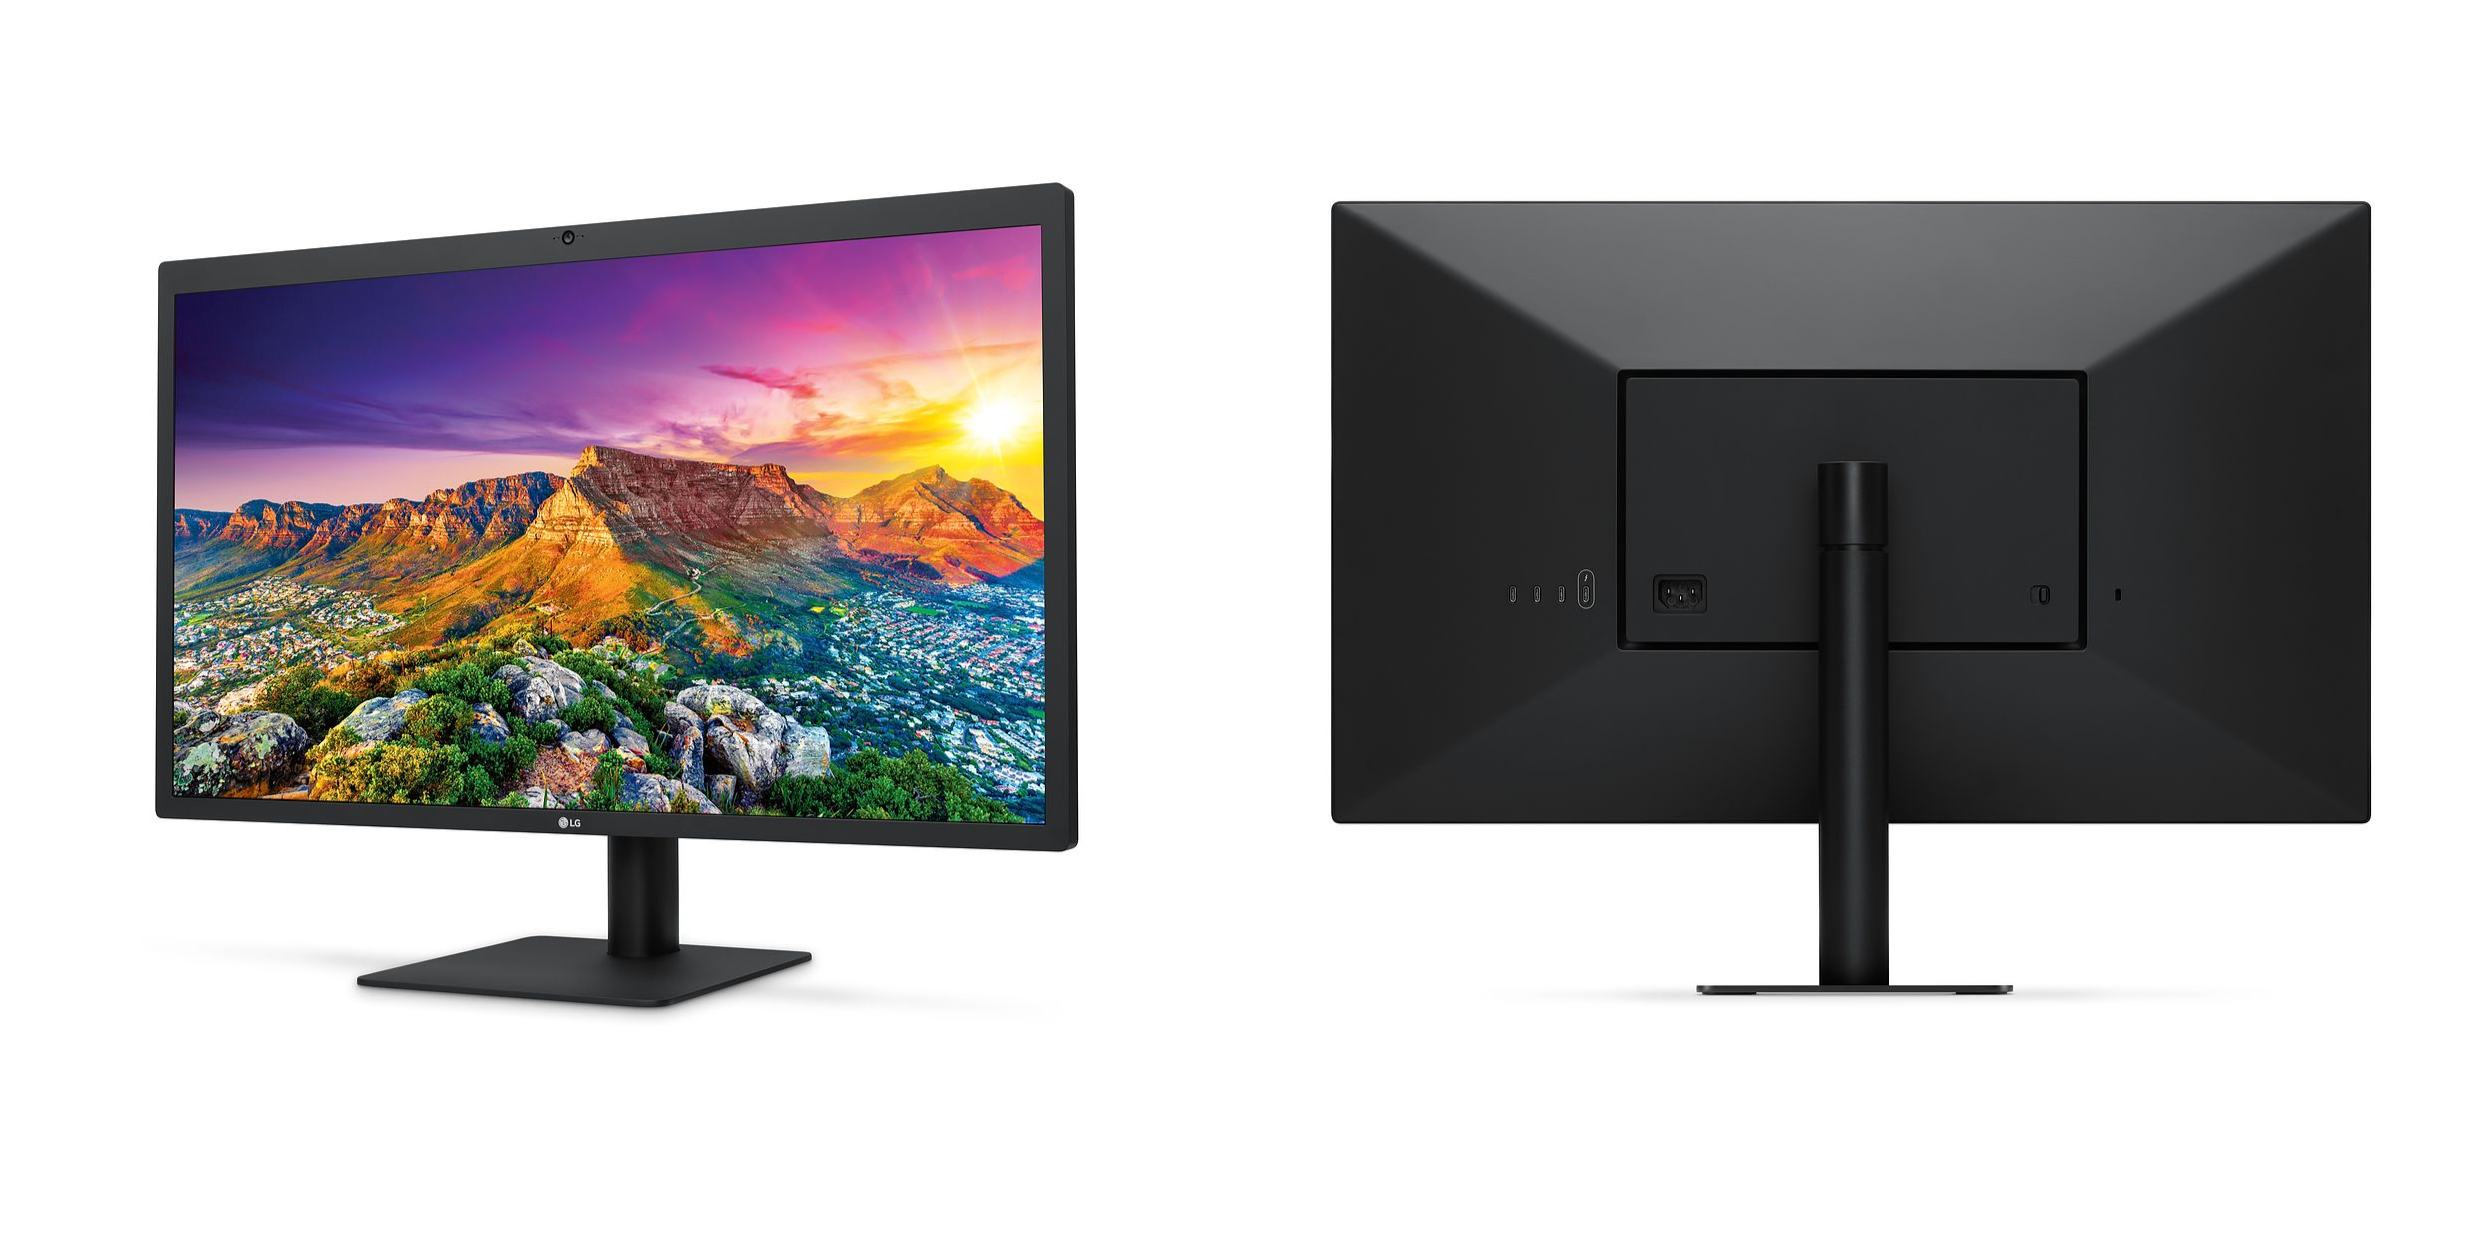 New LG UltraFine 5K display now on sale, works with Mac or iPad